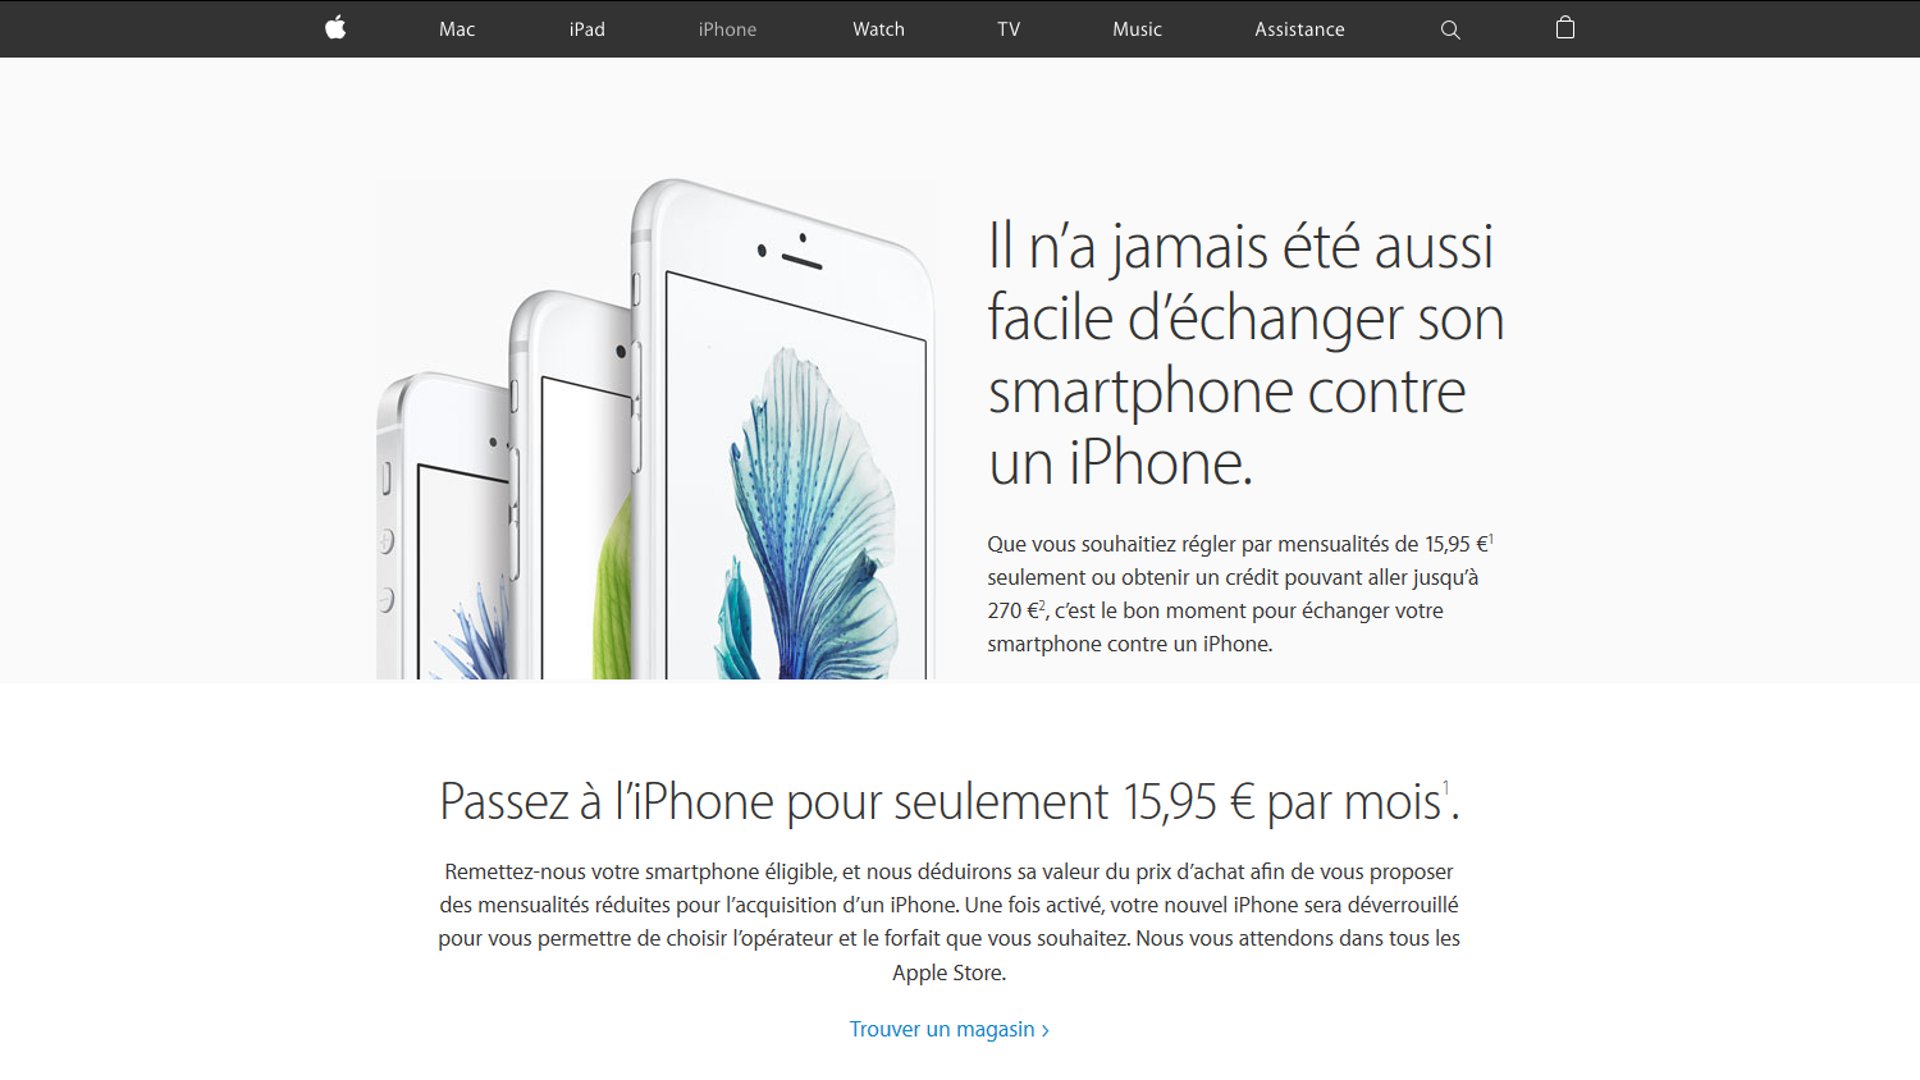 iPhone Trade-Up Program (French)